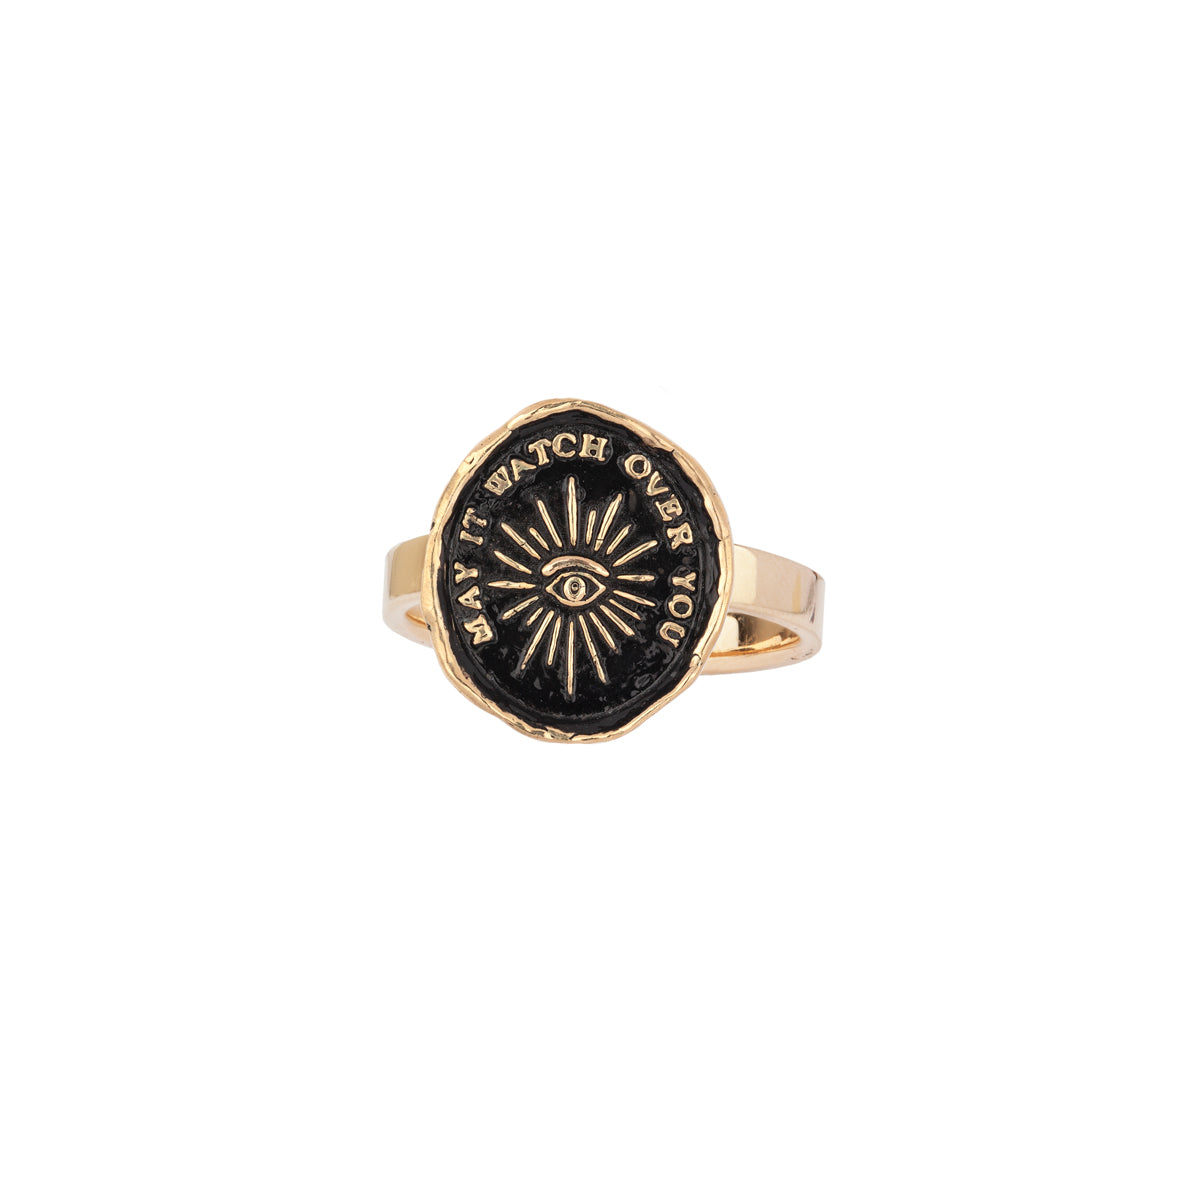 A 14k gold ring with our Higher Power talisman on the band.